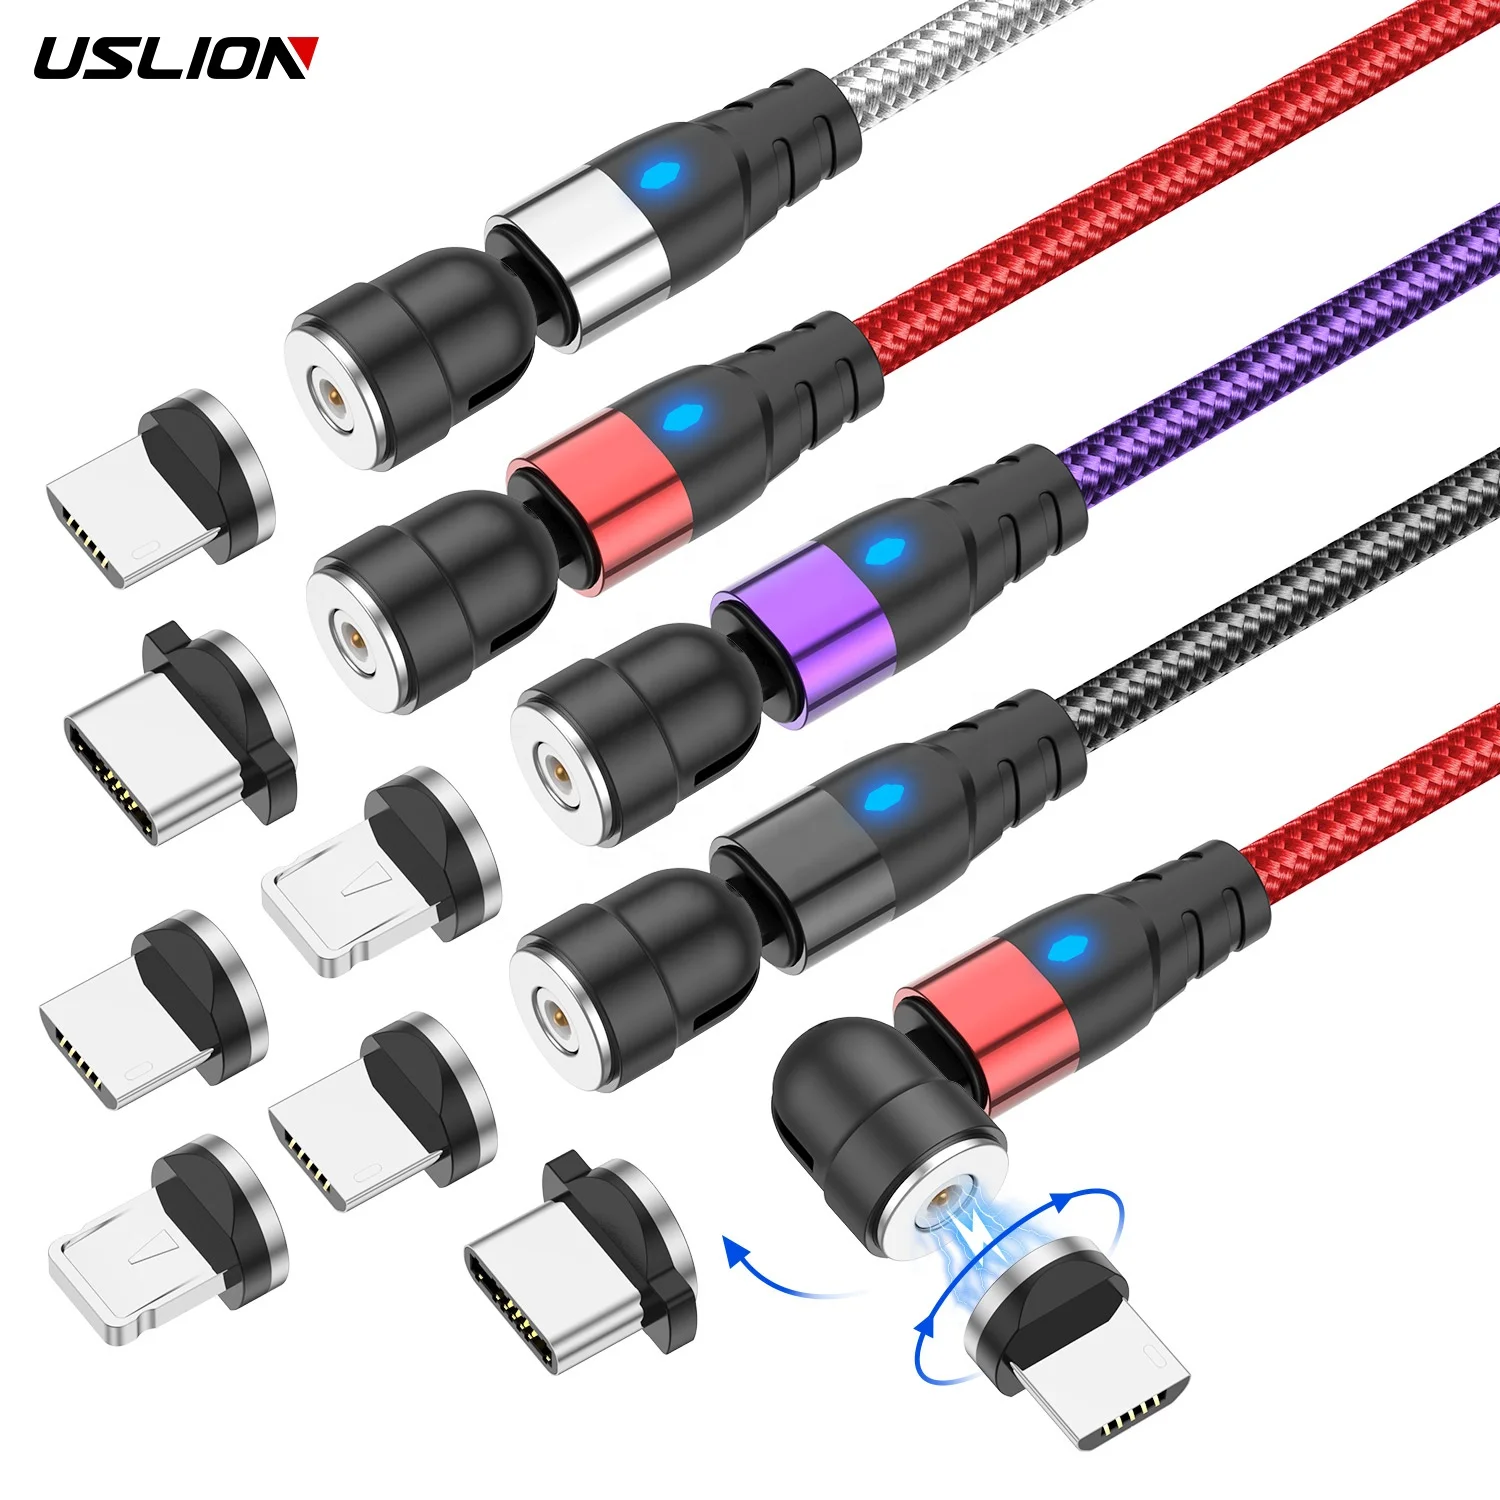 

USLION 3 in 1 1M 2M 540 Rotate Micro USB Magnetic Charging USB Cable for iphone Type C Android Mobile Phone, Black/red/silver/purple